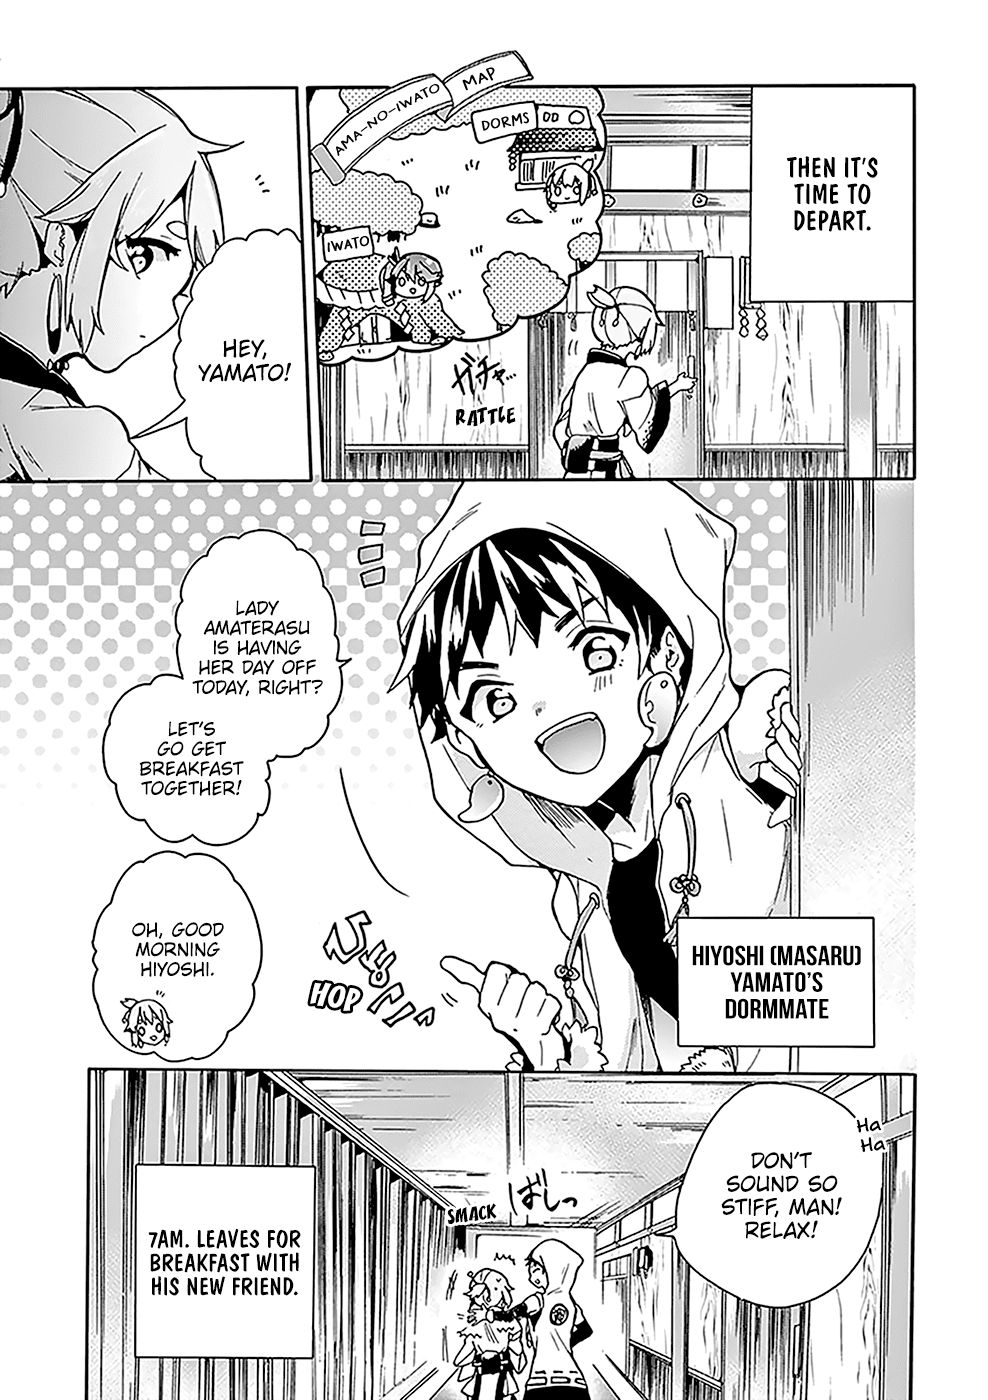 Amaterasu Wants to Stay at Home! - chapter 5 - #6